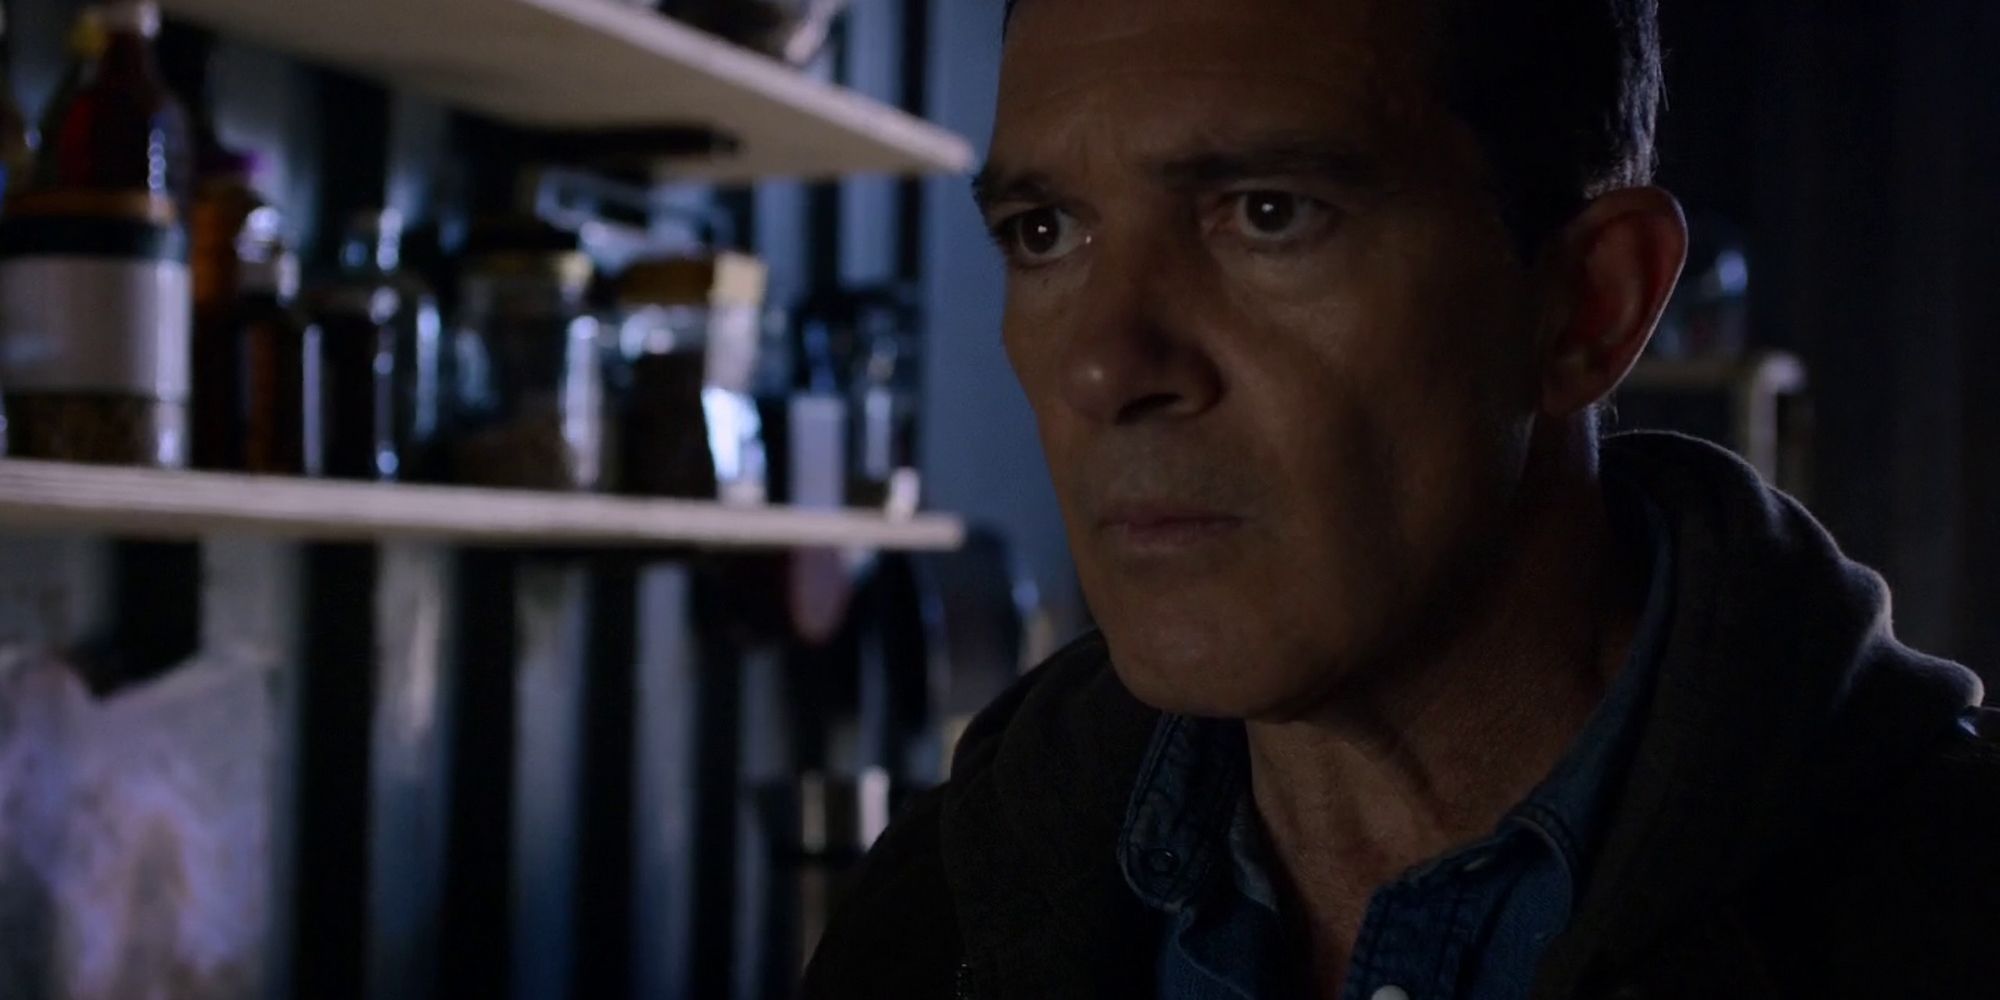 Antonio Banderas looks forward, determined, in Acts of Vengeance